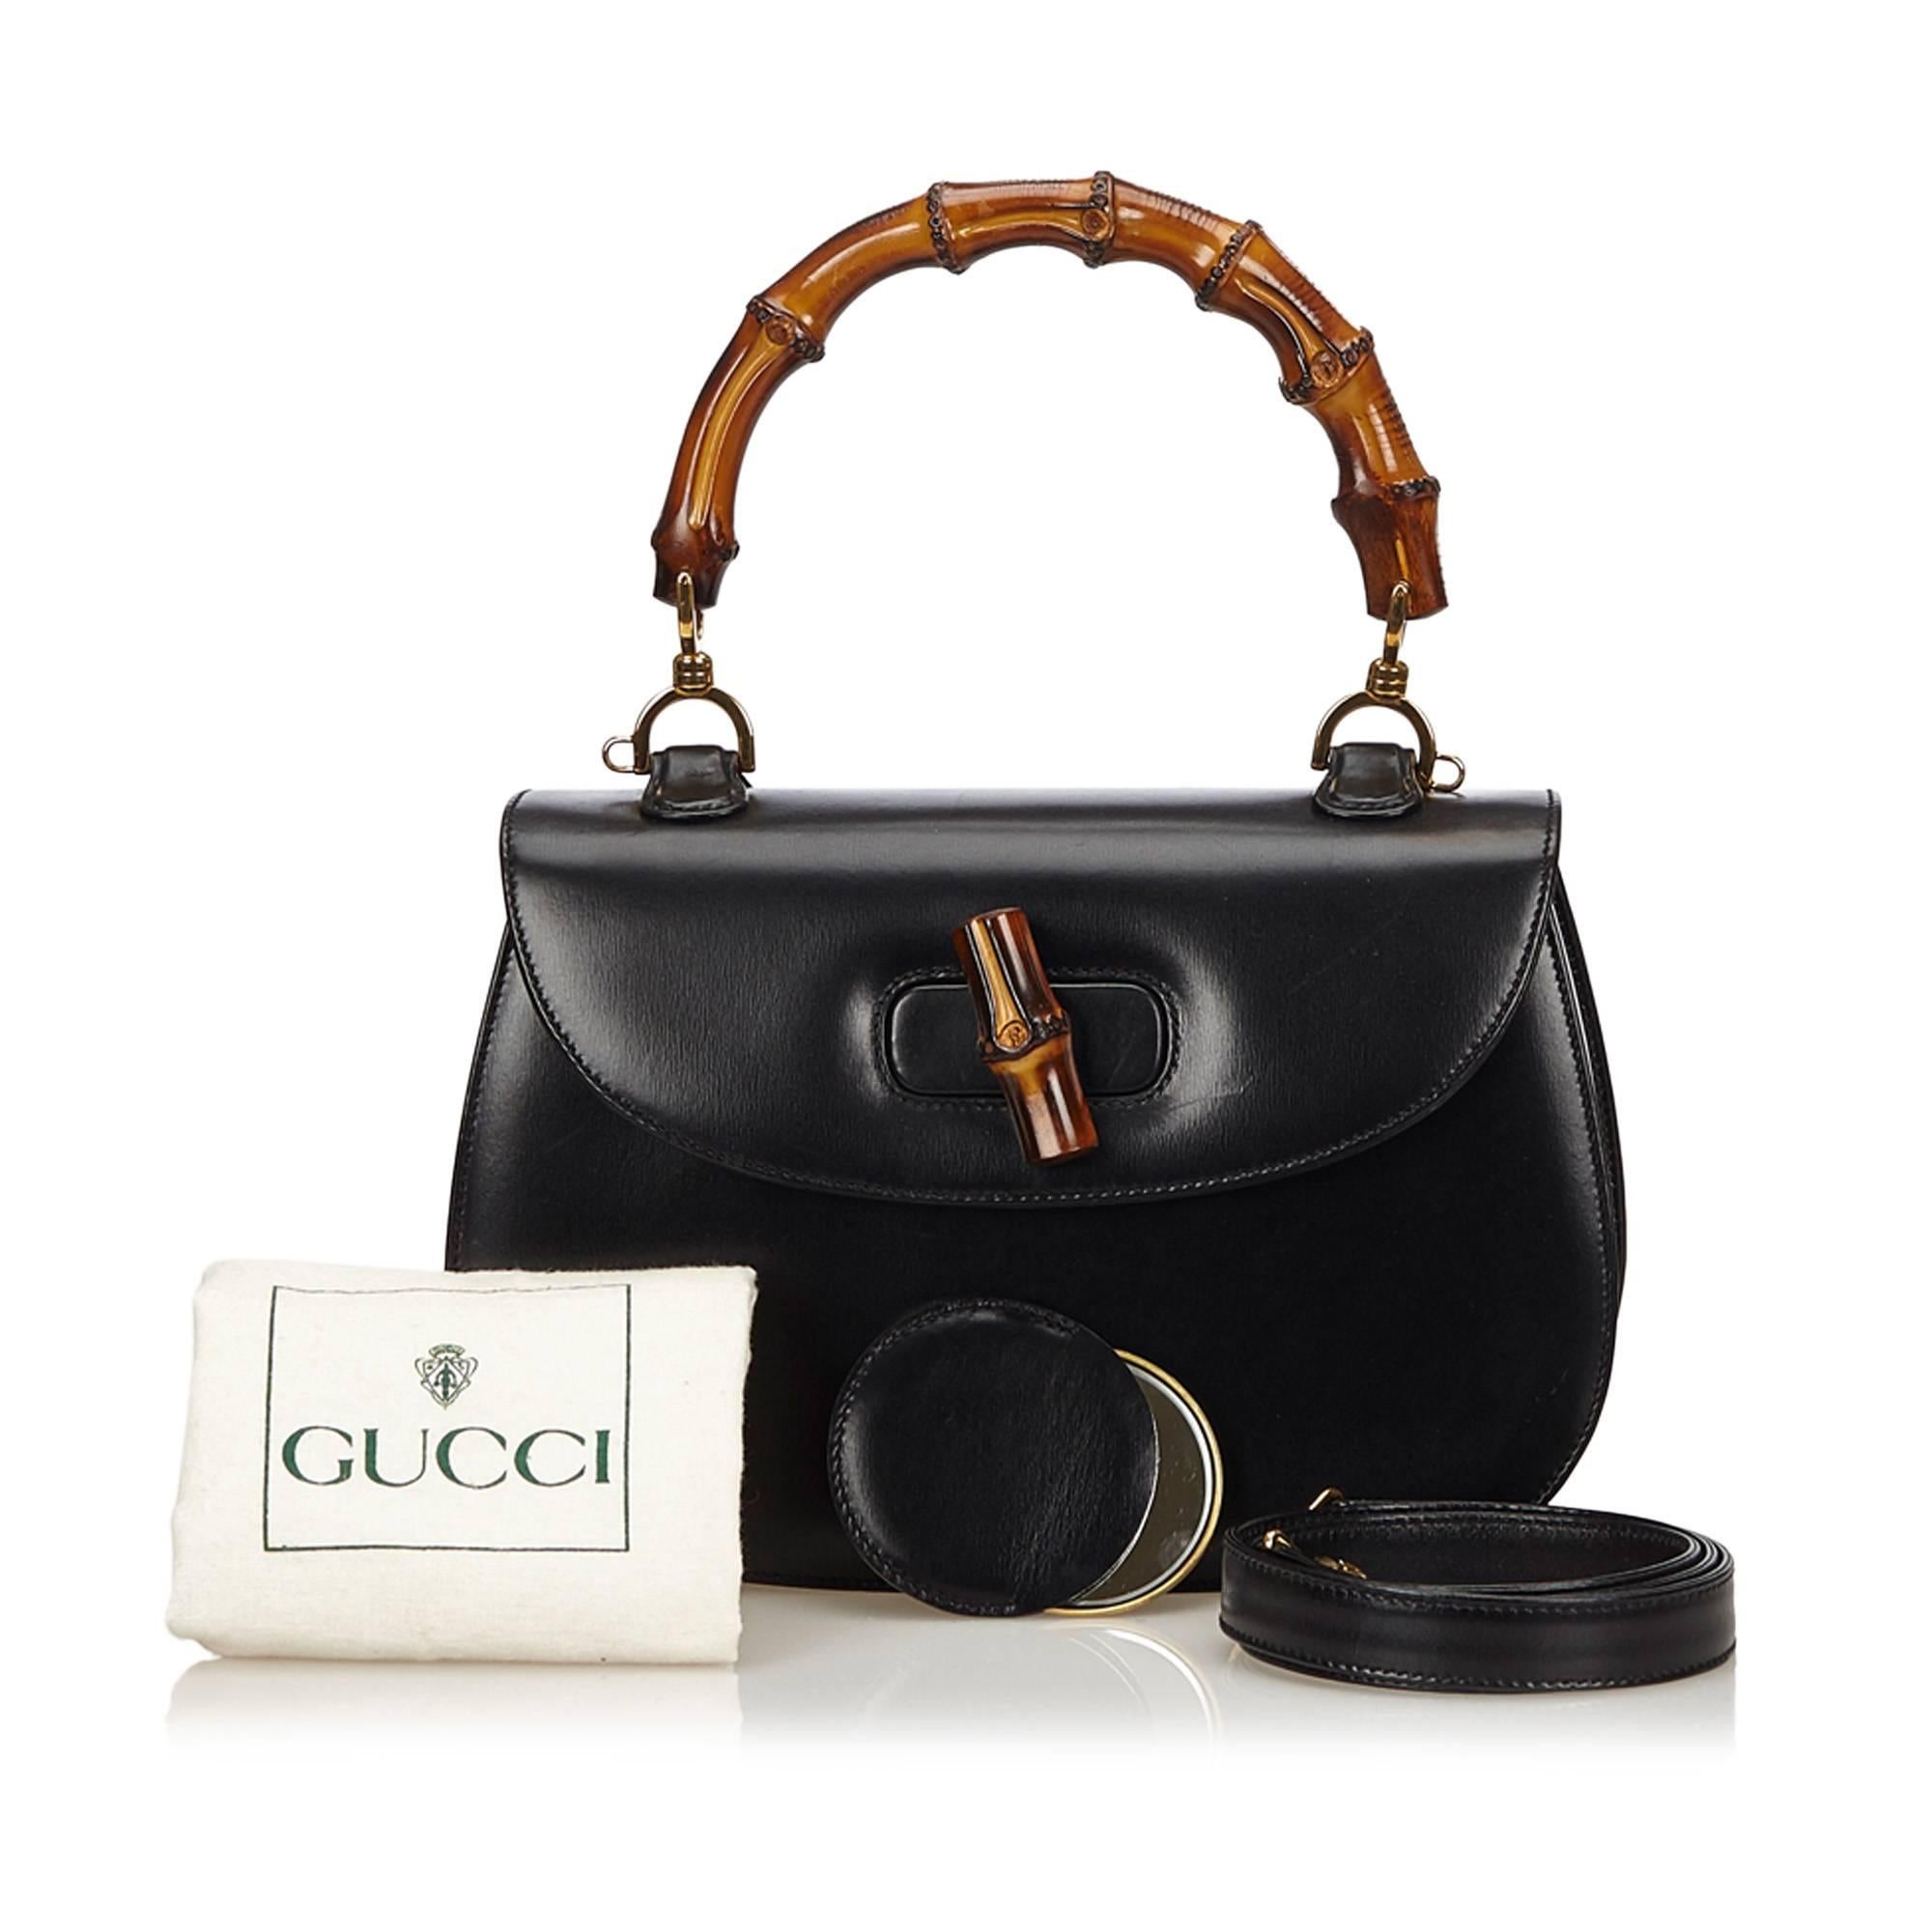 Gucci Black Leather Bamboo Handle Bag with detachable shoulder strap  3